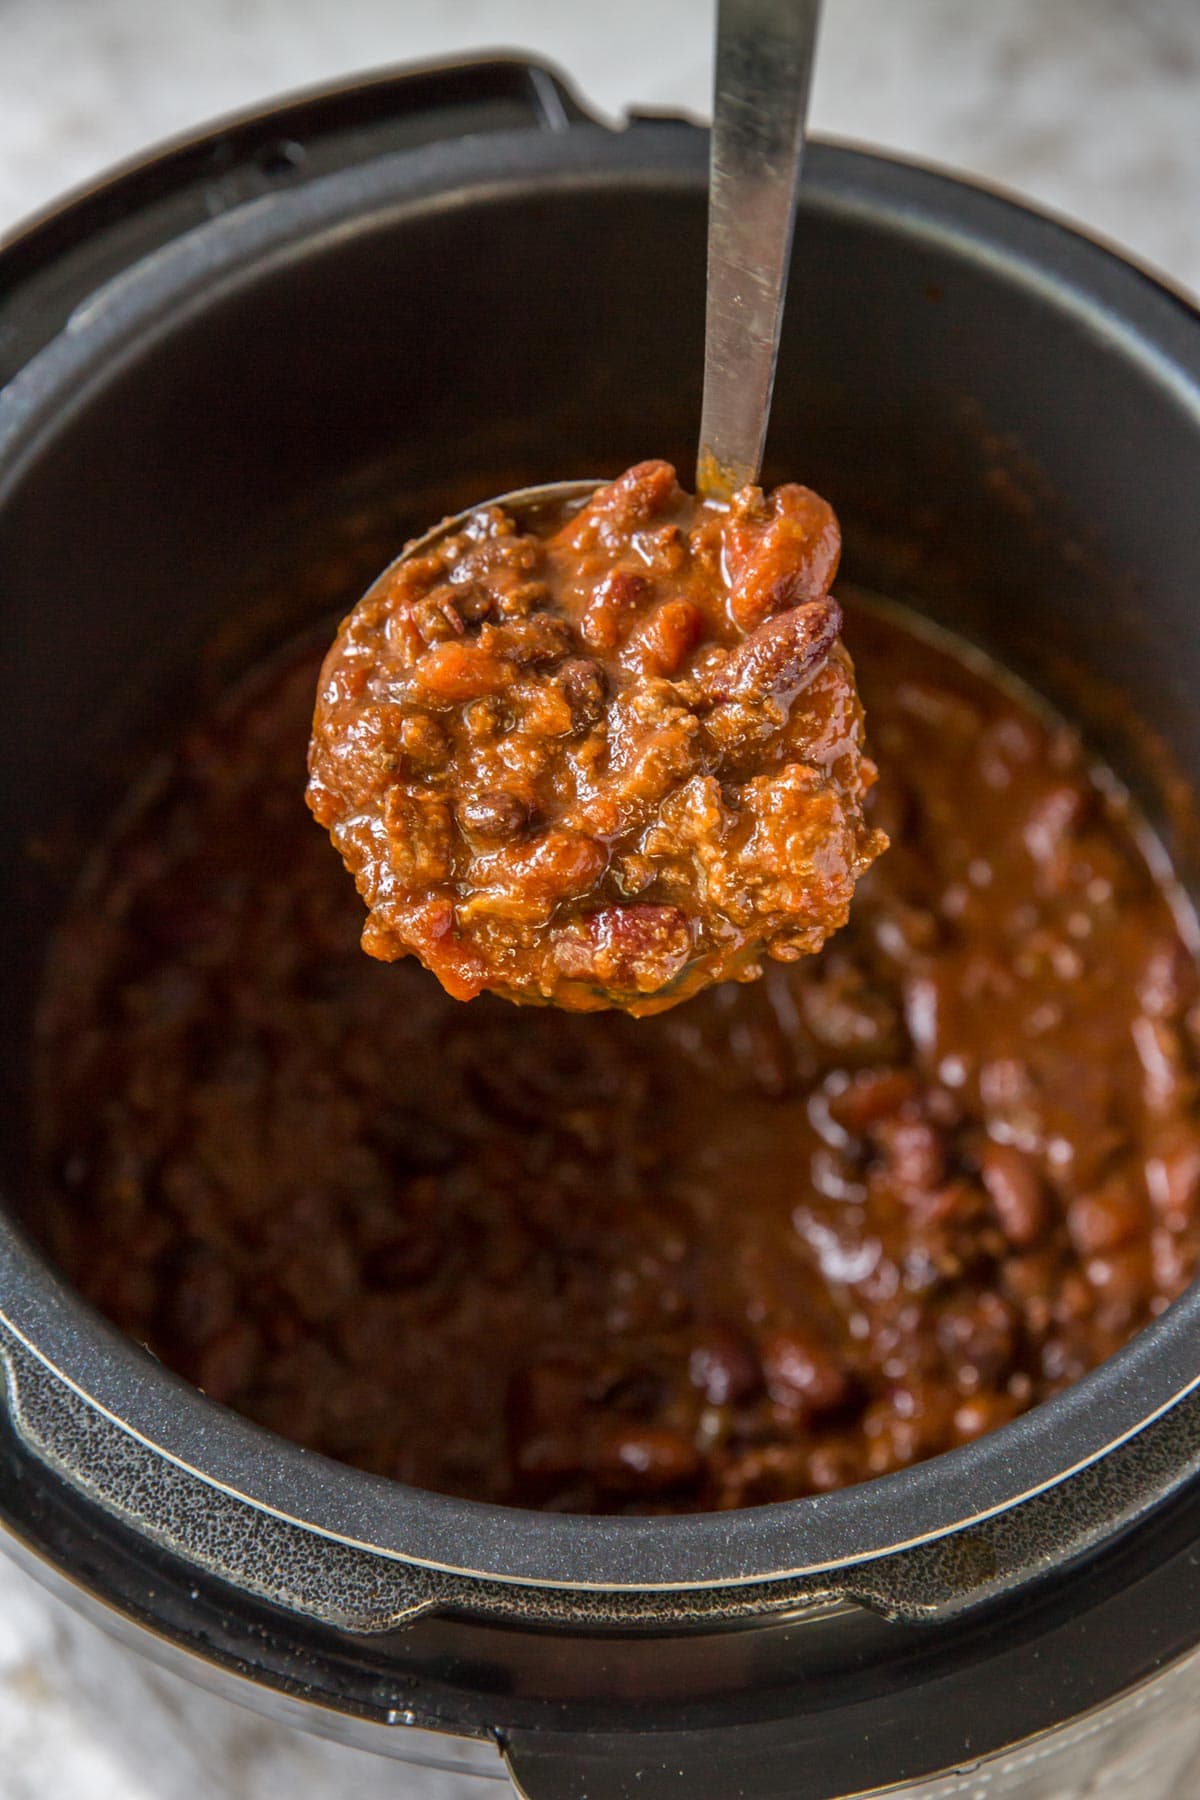 Failproof Instant Pot Chili - Green Healthy Cooking